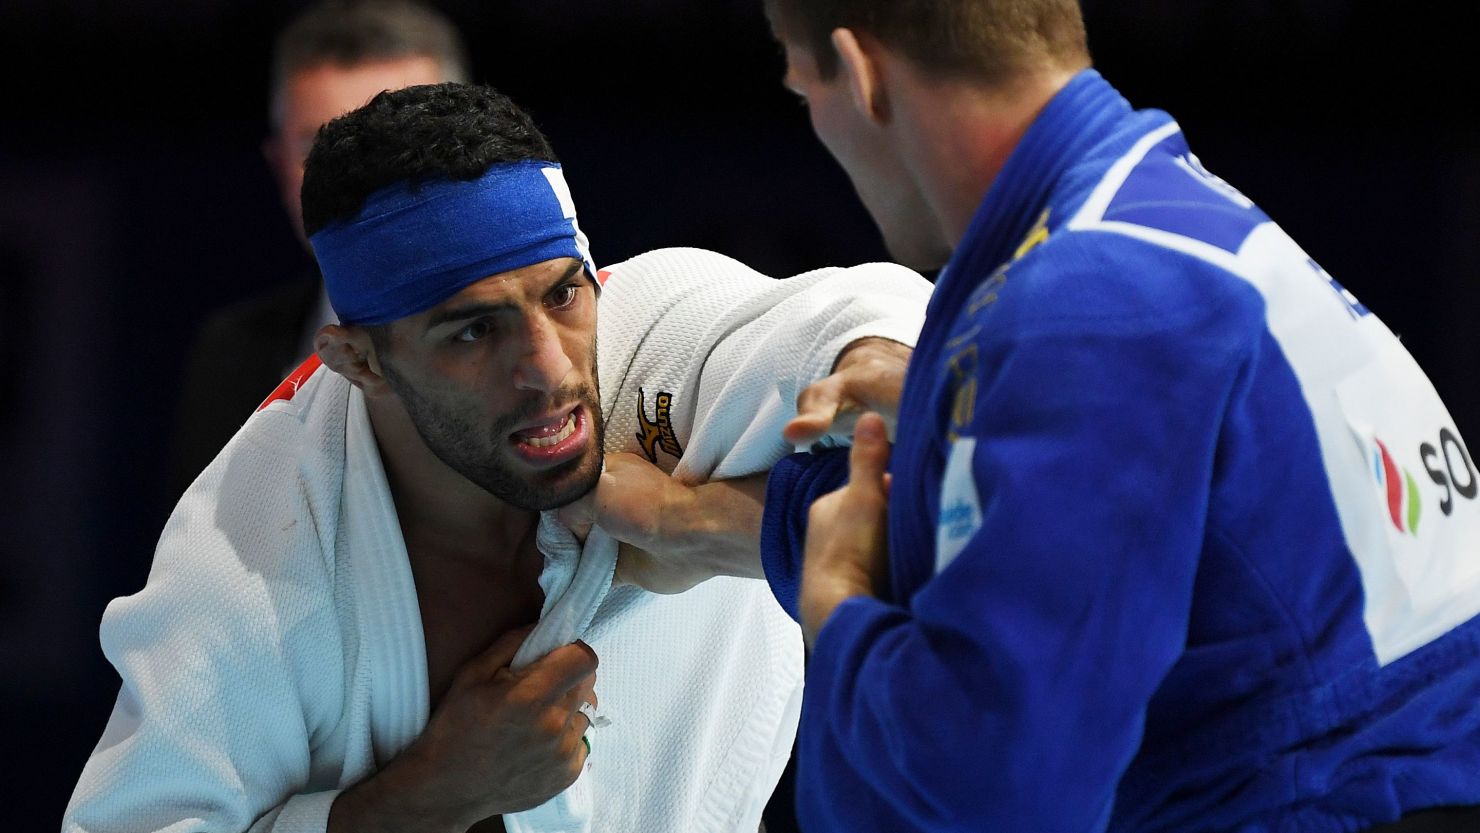 Mollaei fights against Matthias Casse during the semifinal of judo's World Championships.